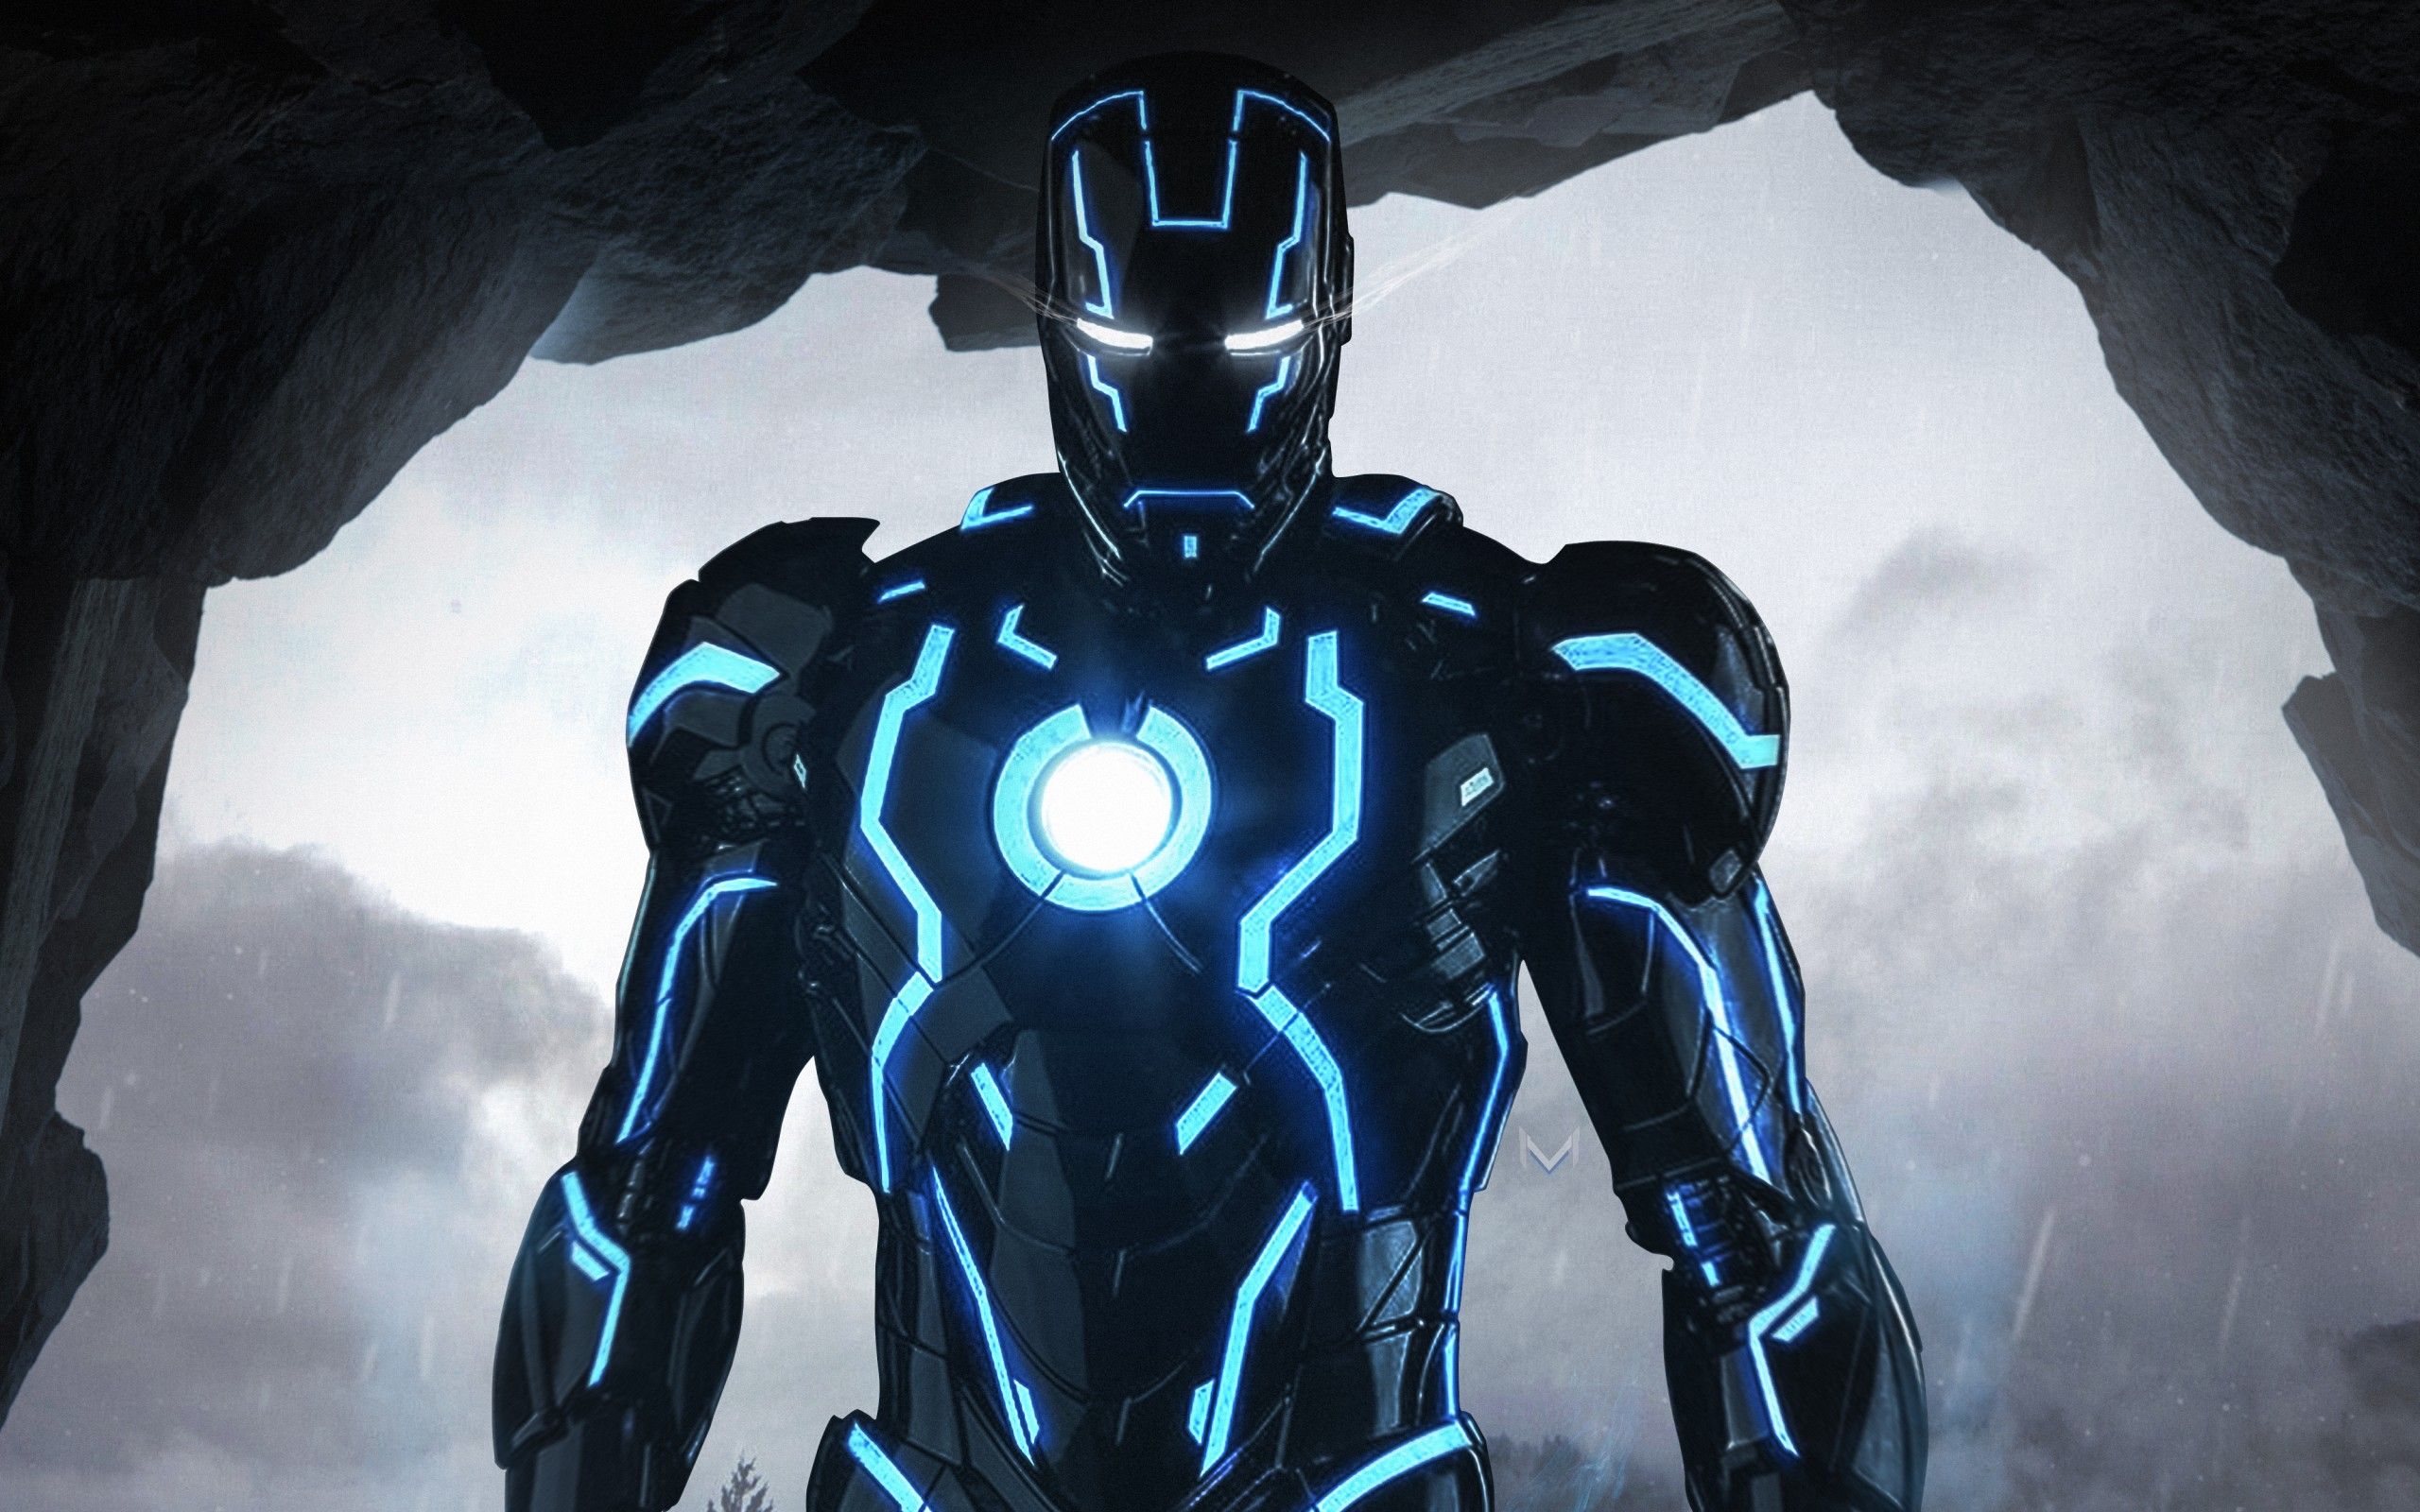 Neon Iron Man 4K Wallpaper 2560x1600 Hot Desktop and background for your PC and mobile